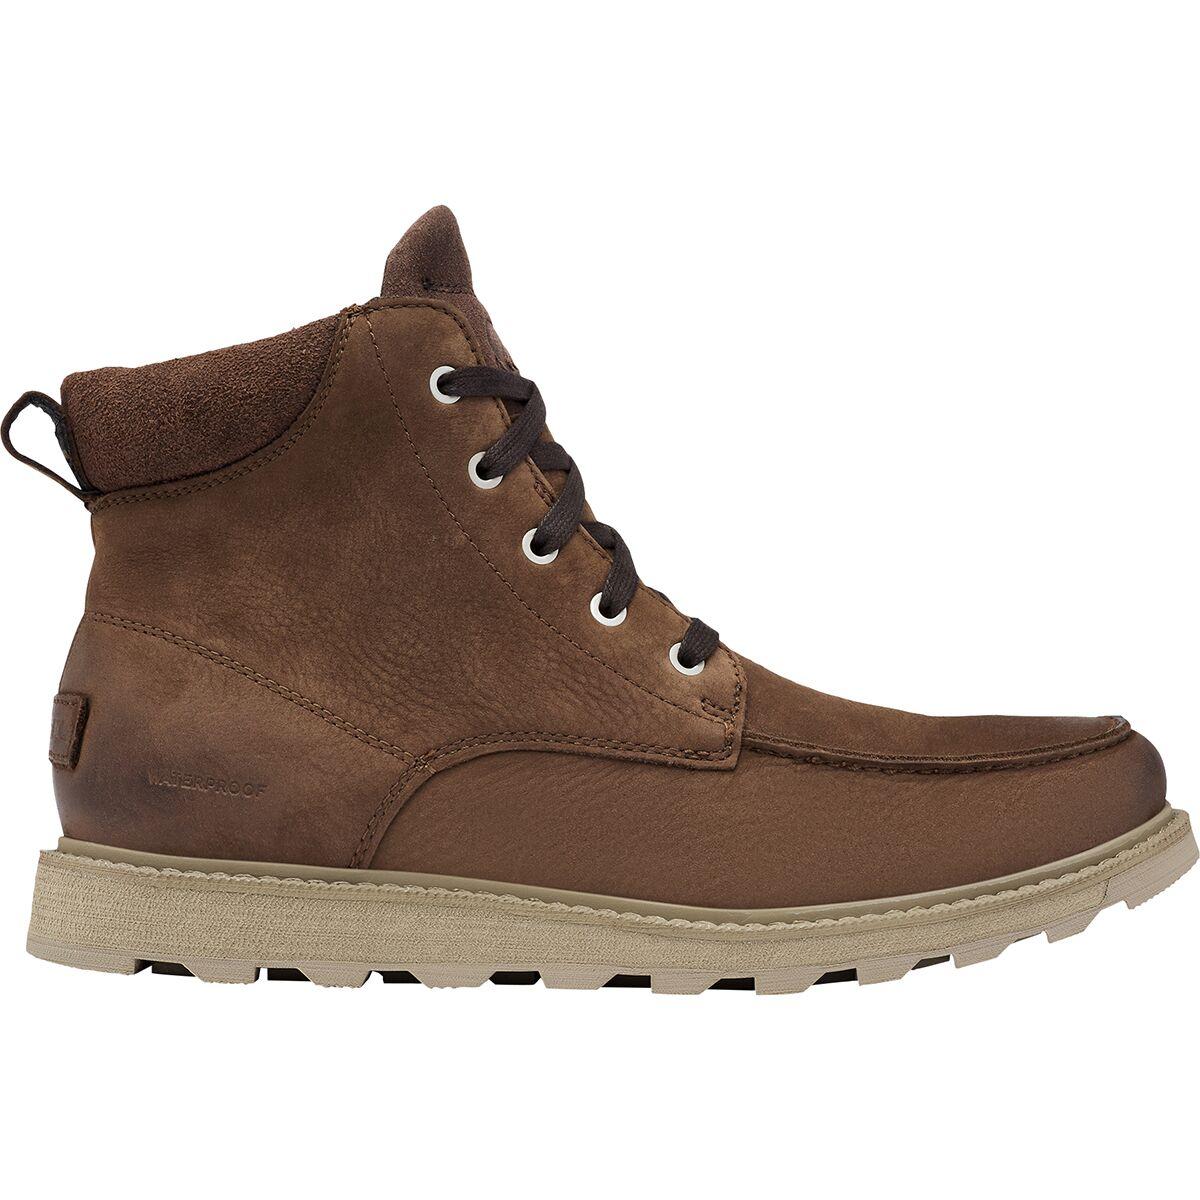 Sorel Leather Madson Ii Moc Toe Wp Boot in Tobacco (Brown) for Men - Lyst